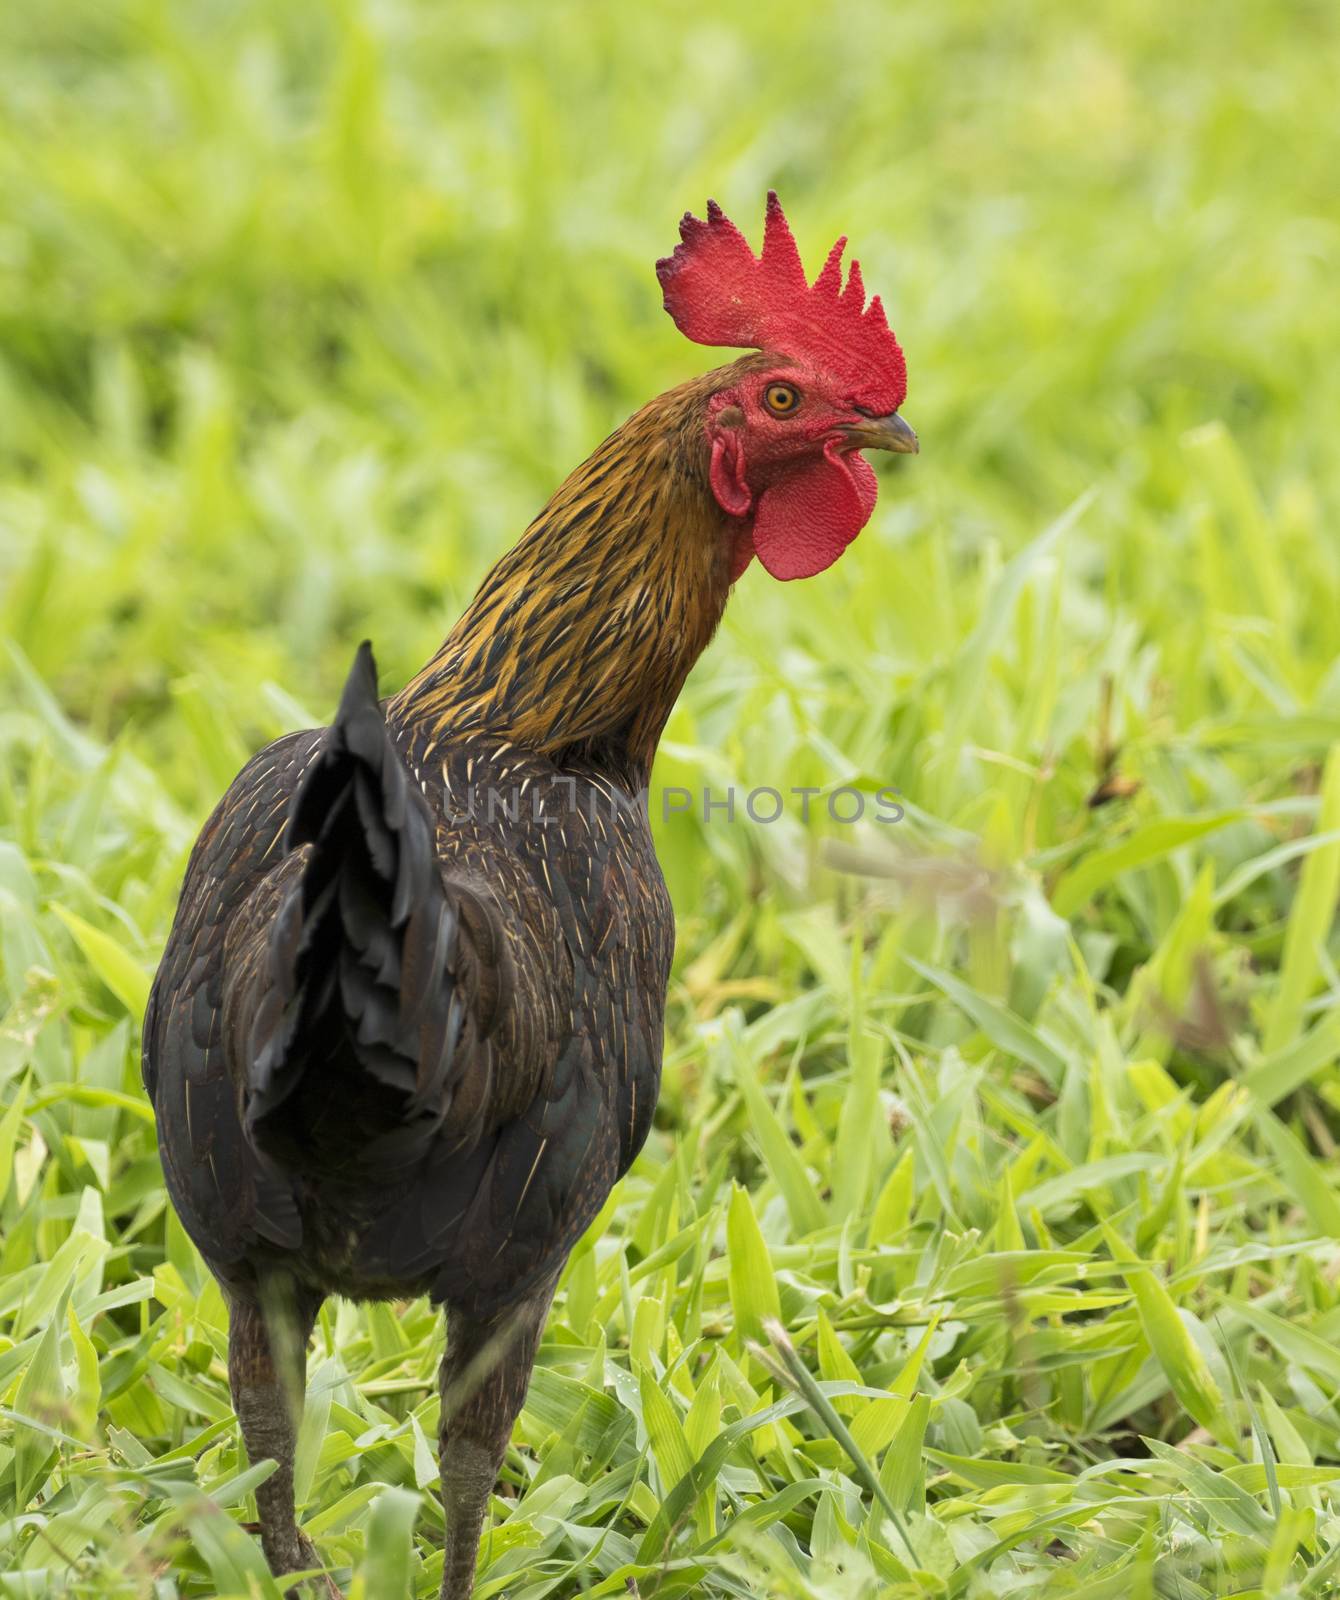 Image of a cock in green field.